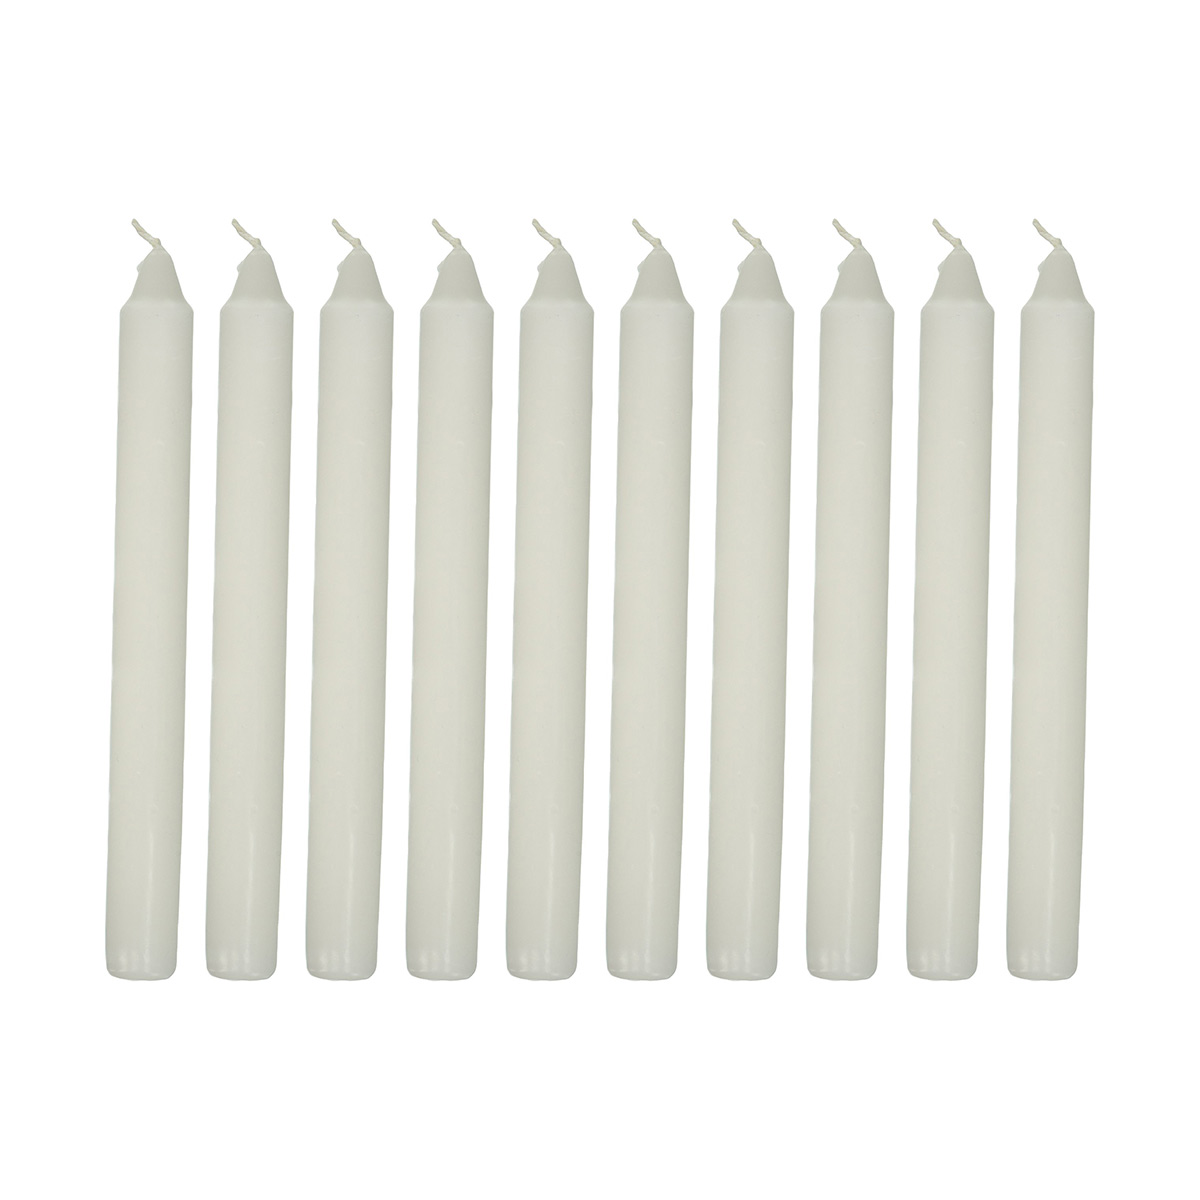 Regular Small Candle